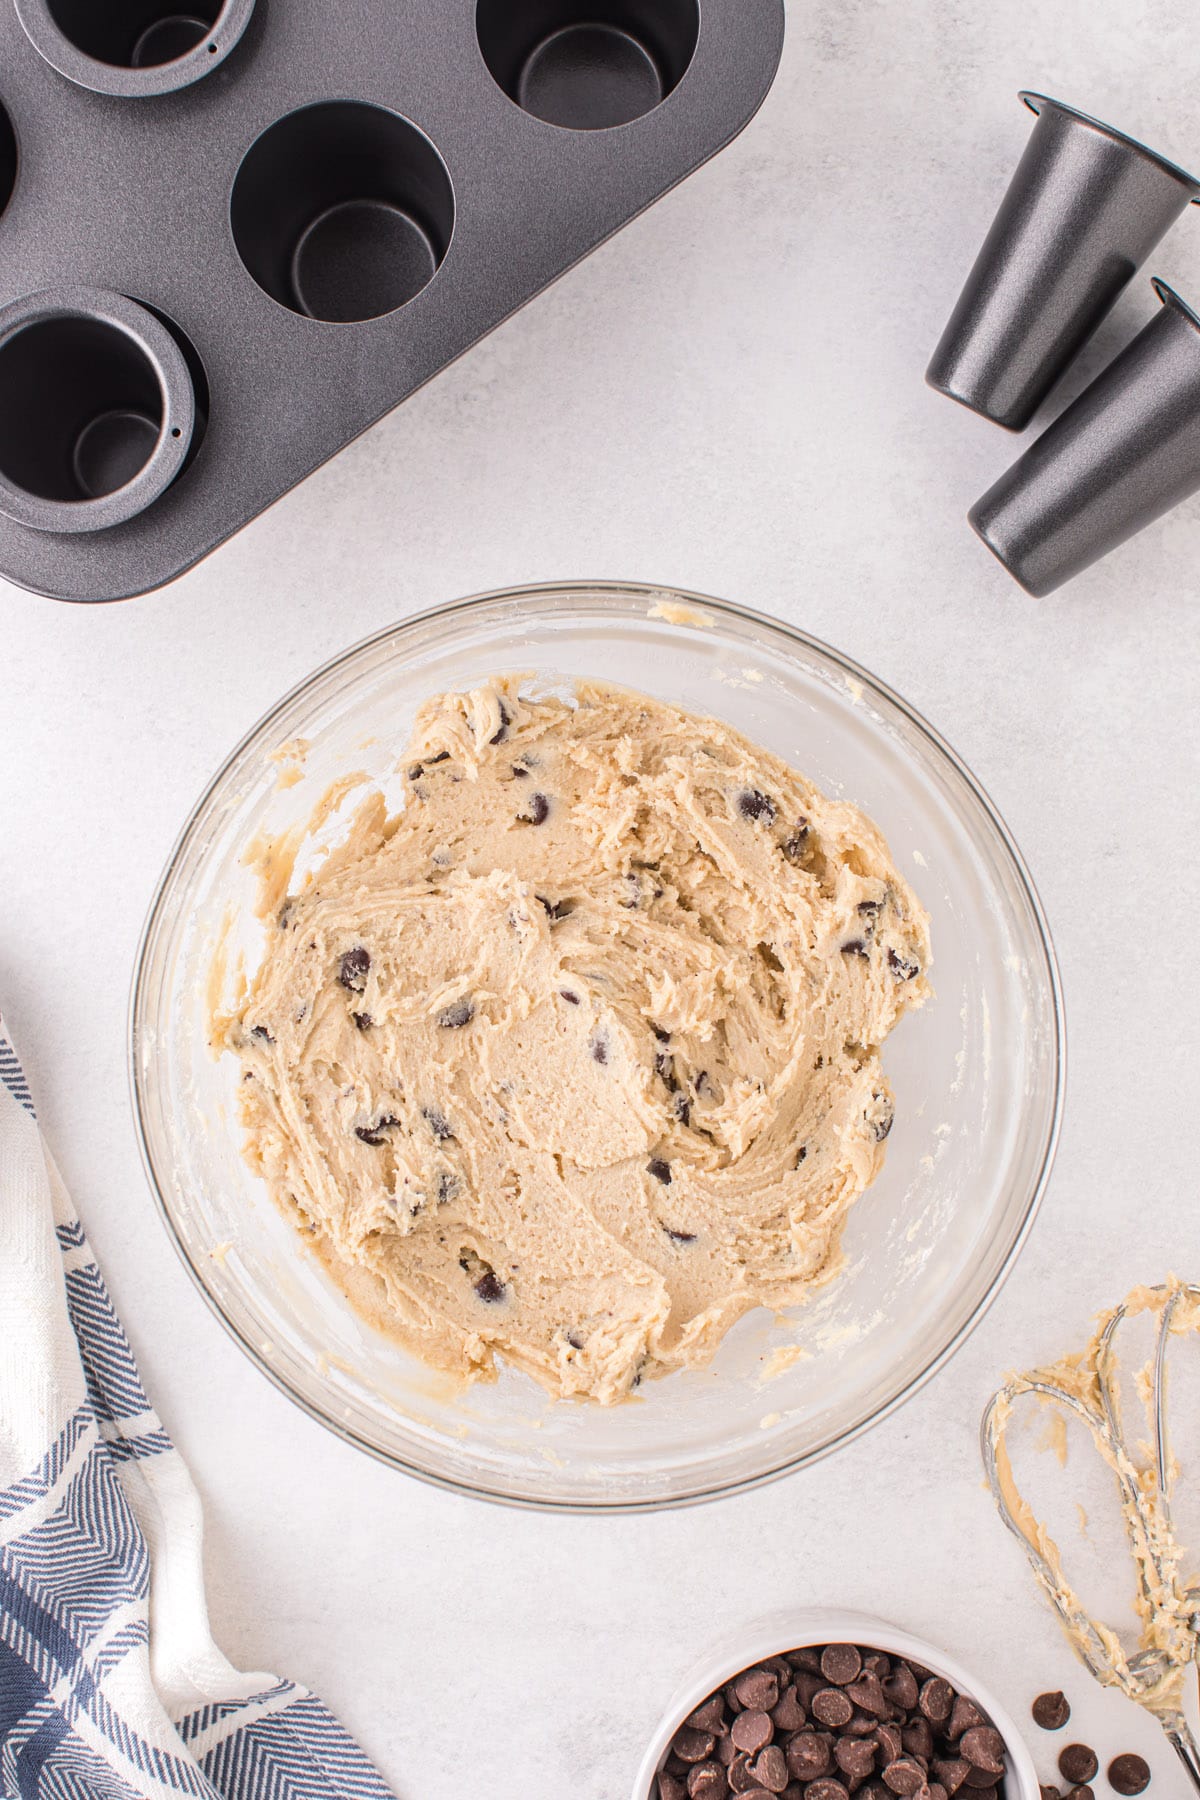 Mix together the cookie mix, butter, and egg to make chocolate chip cookie shooters